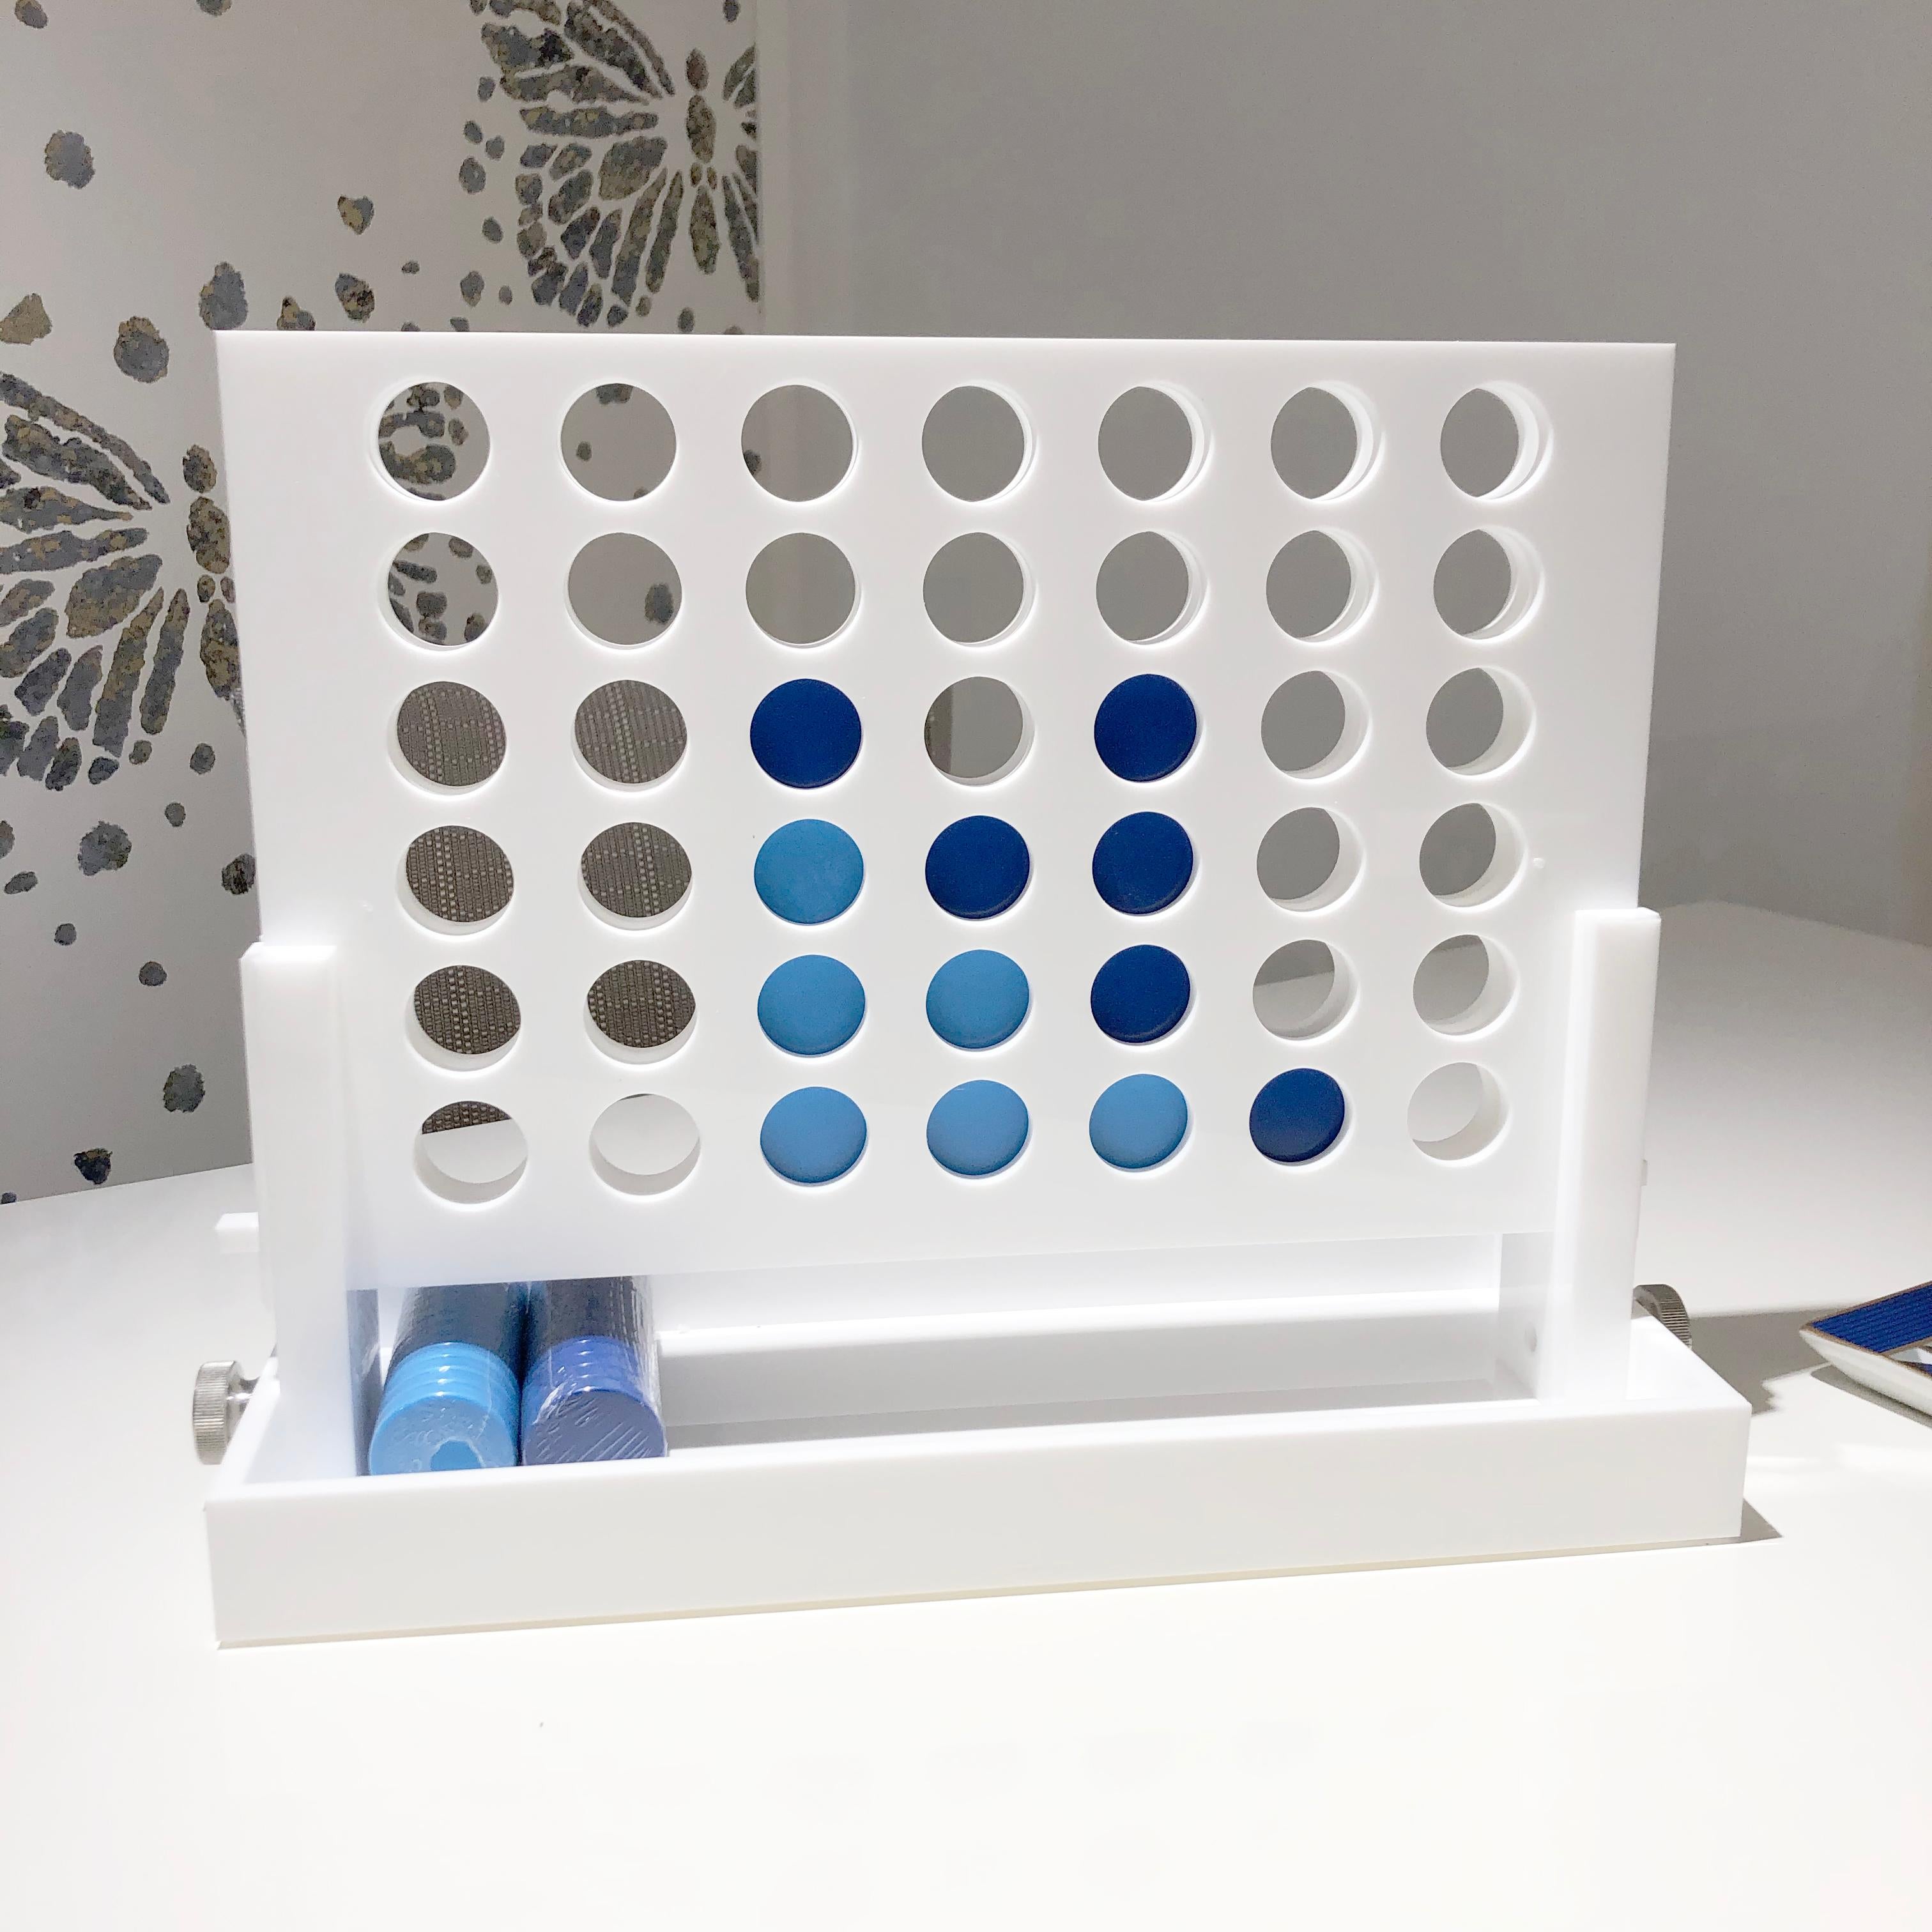 The classic game of Connect Four is reimagined. Crafted out of acrylic and lacquered white, the game features dark and light blue chips that are pleasing to the eye; allowing this piece to be kept out year round as decor. 

Measurements

13” H x